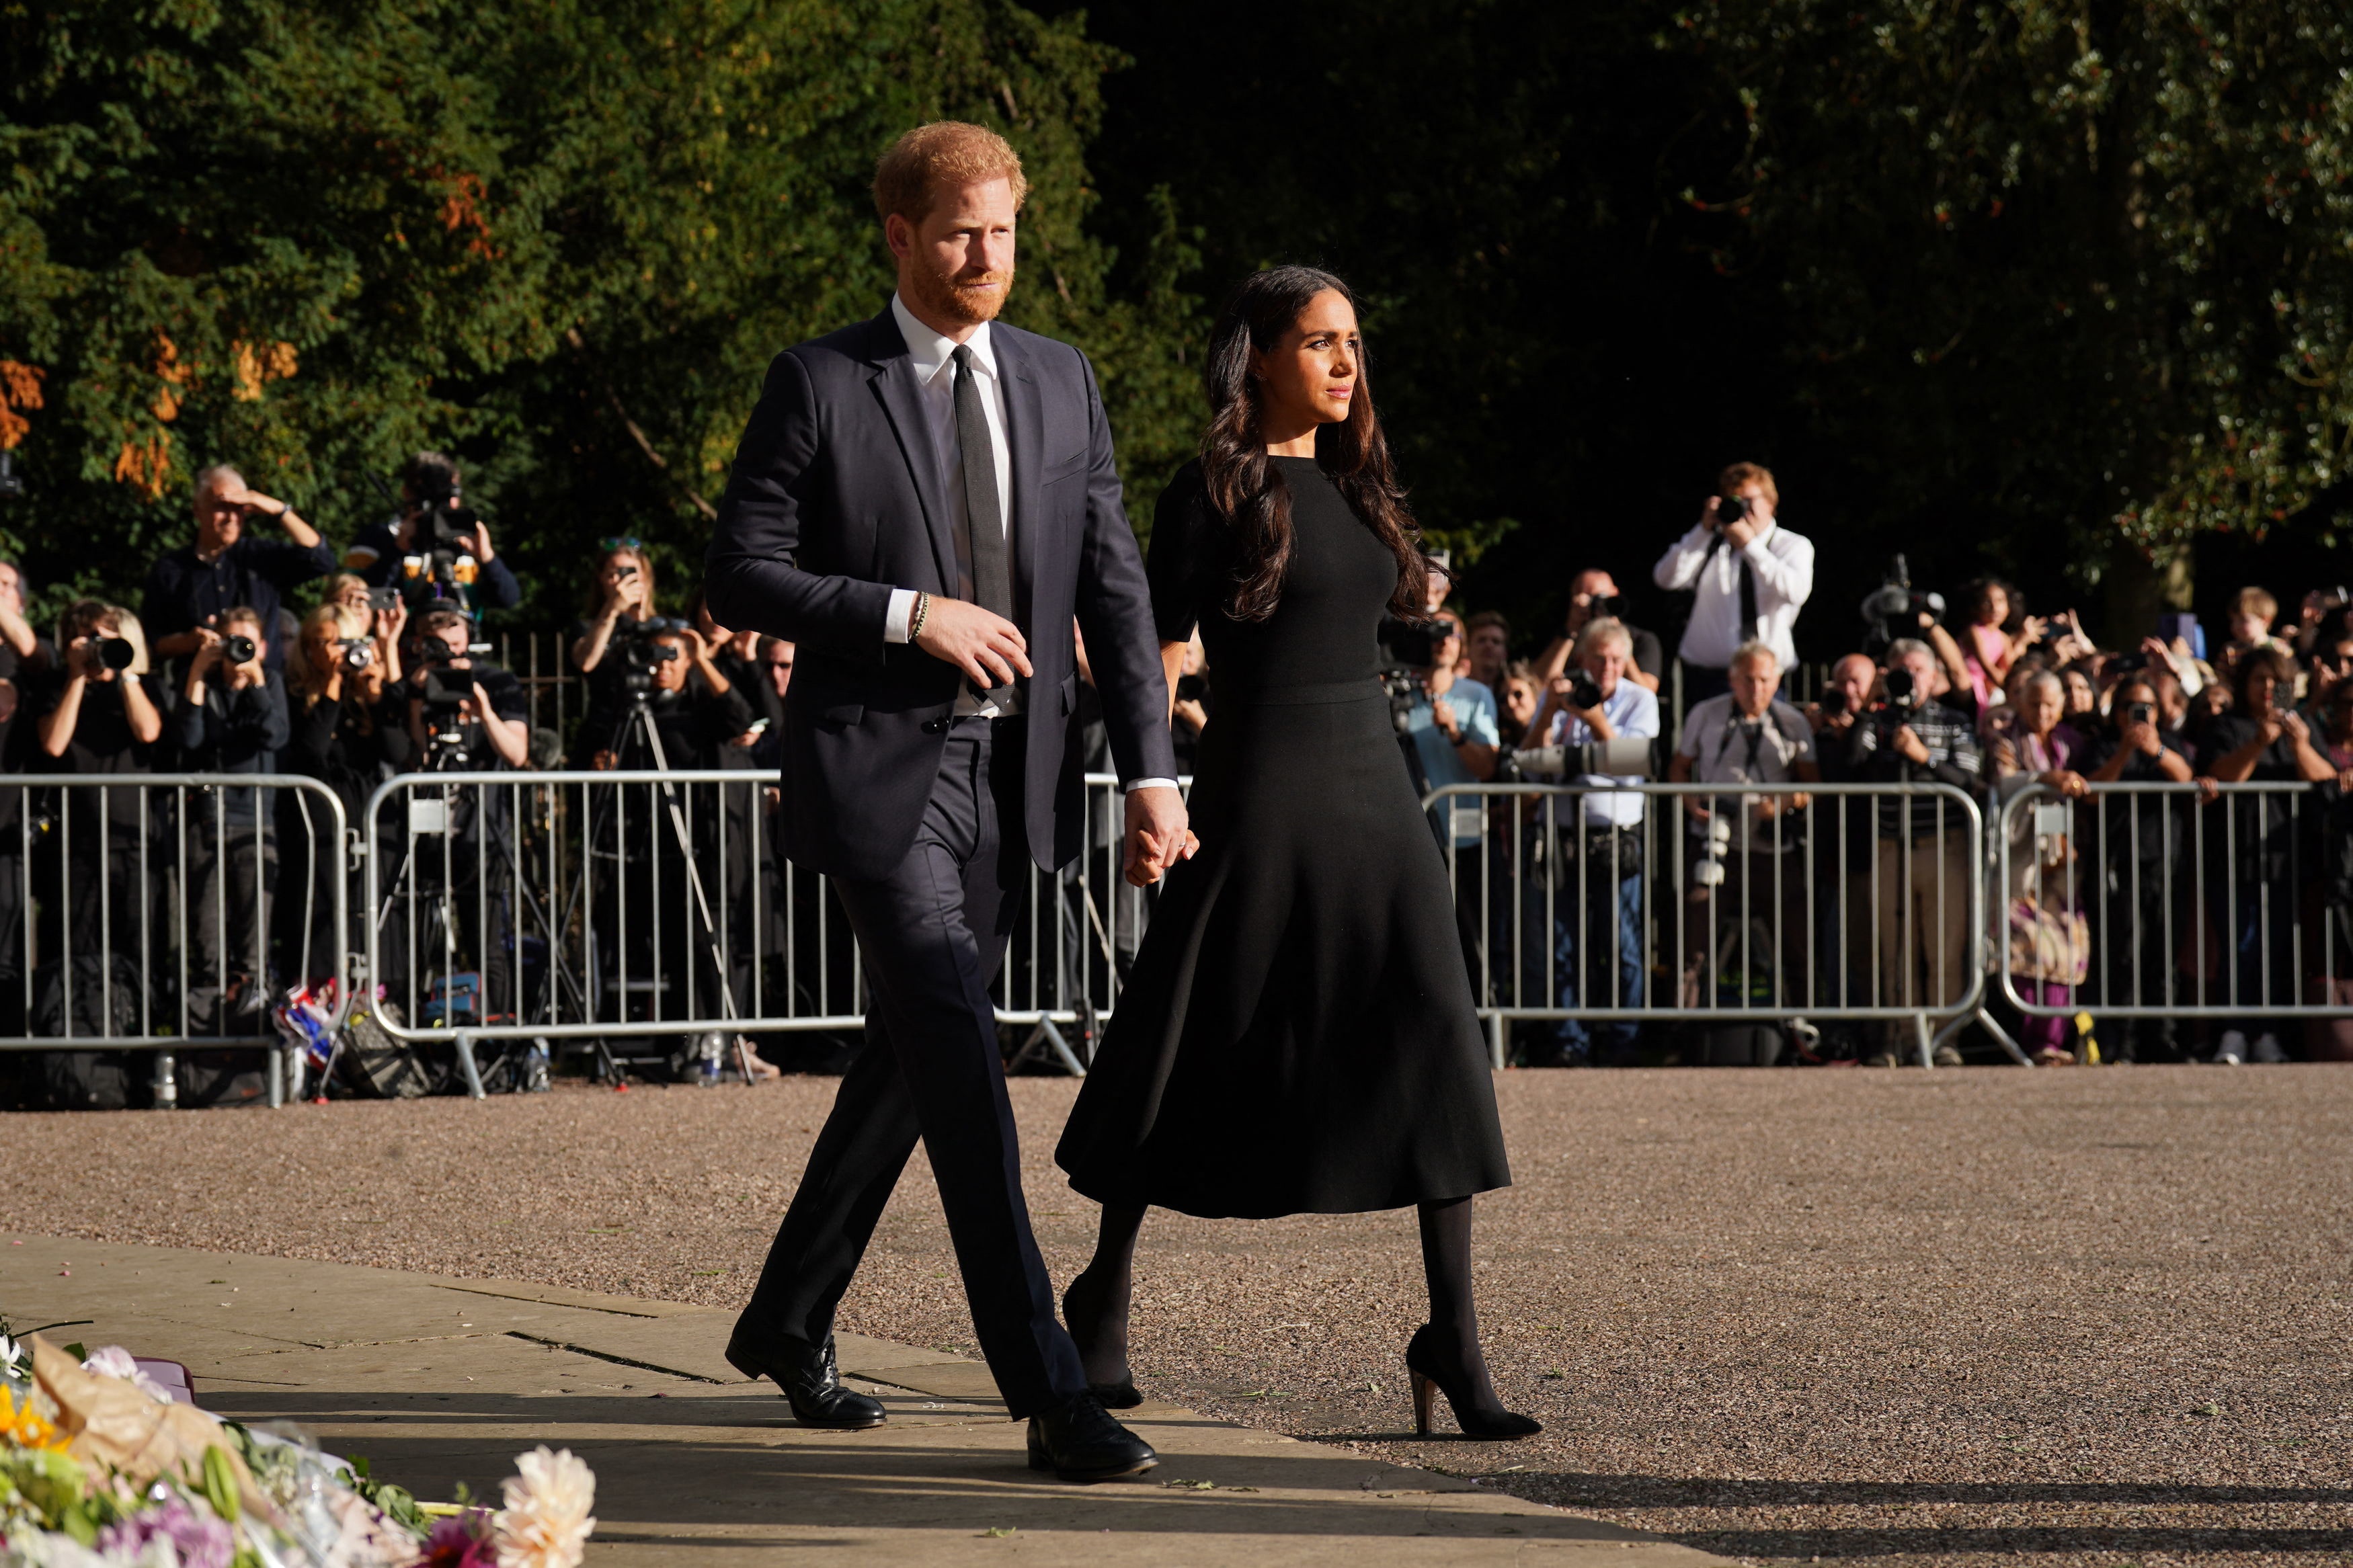 Image may contain: Clothing, Apparel, Human, Person, Prince Harry, Duke of Sussex, Suit, Coat, and Overcoat